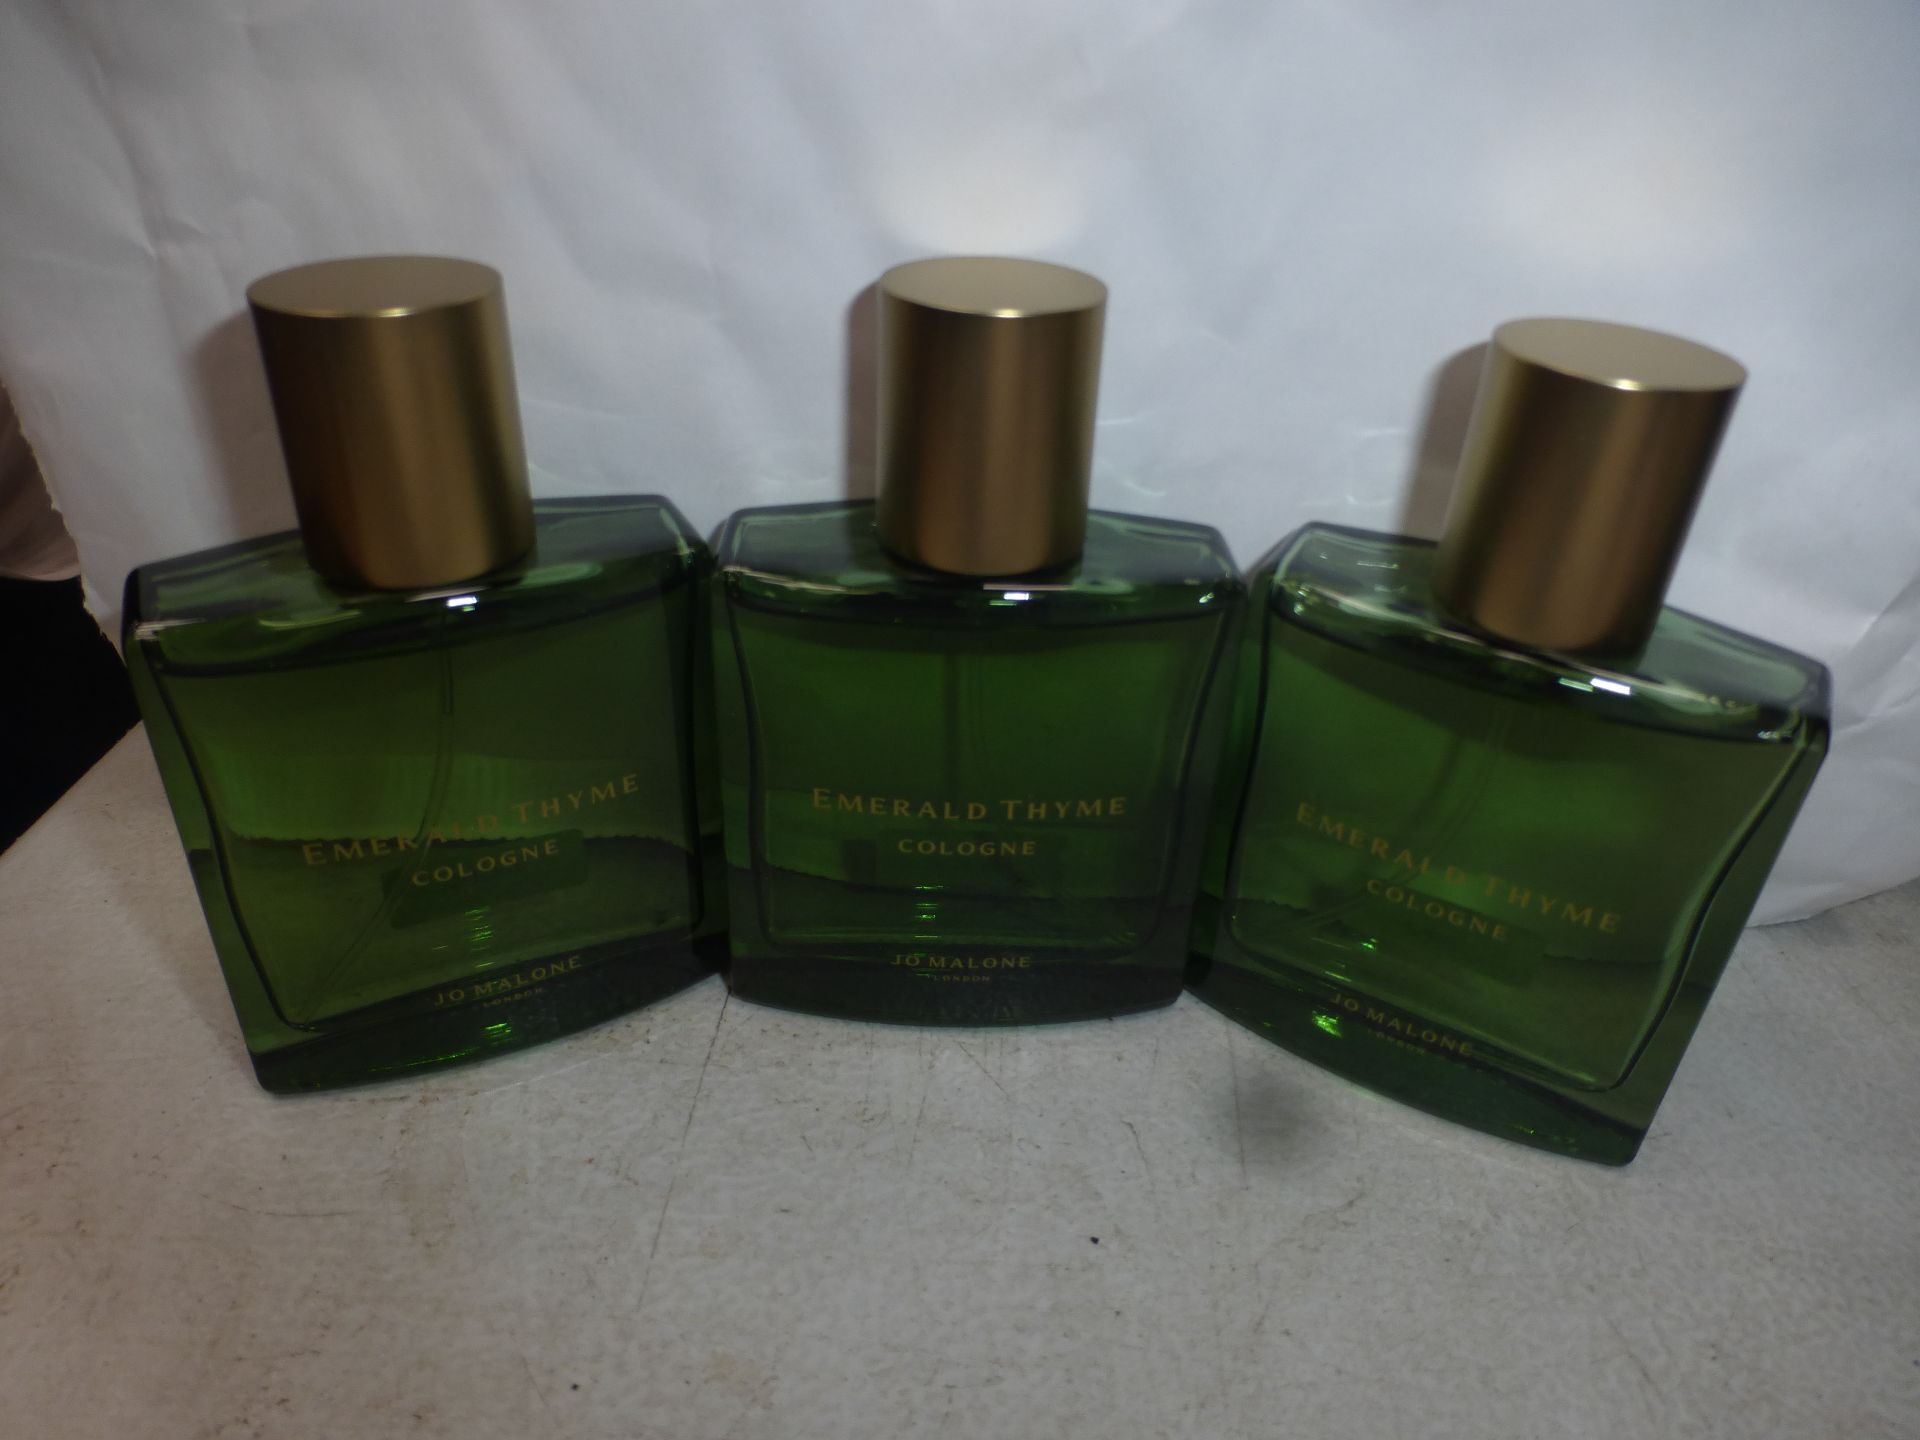 3 x 30ml bottles of Jo Malone Emerald Thyme cologne - new (C13B)